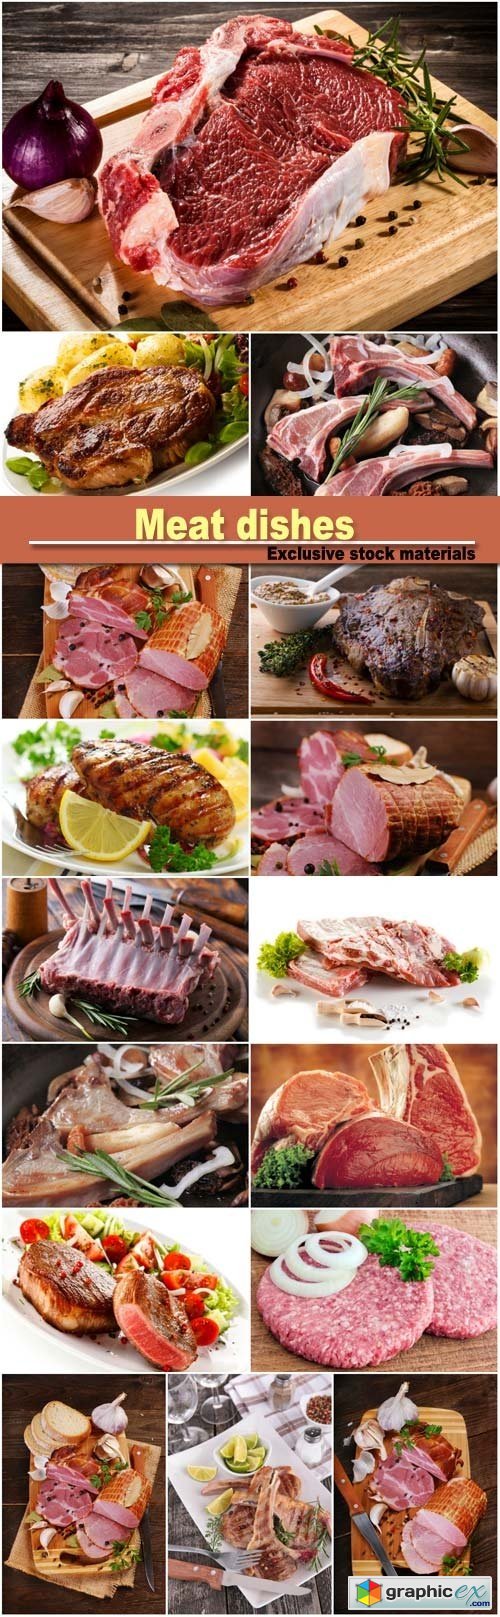 Meat dishes, lamb chops, smoked ham, lamb ribs with spices and herbs